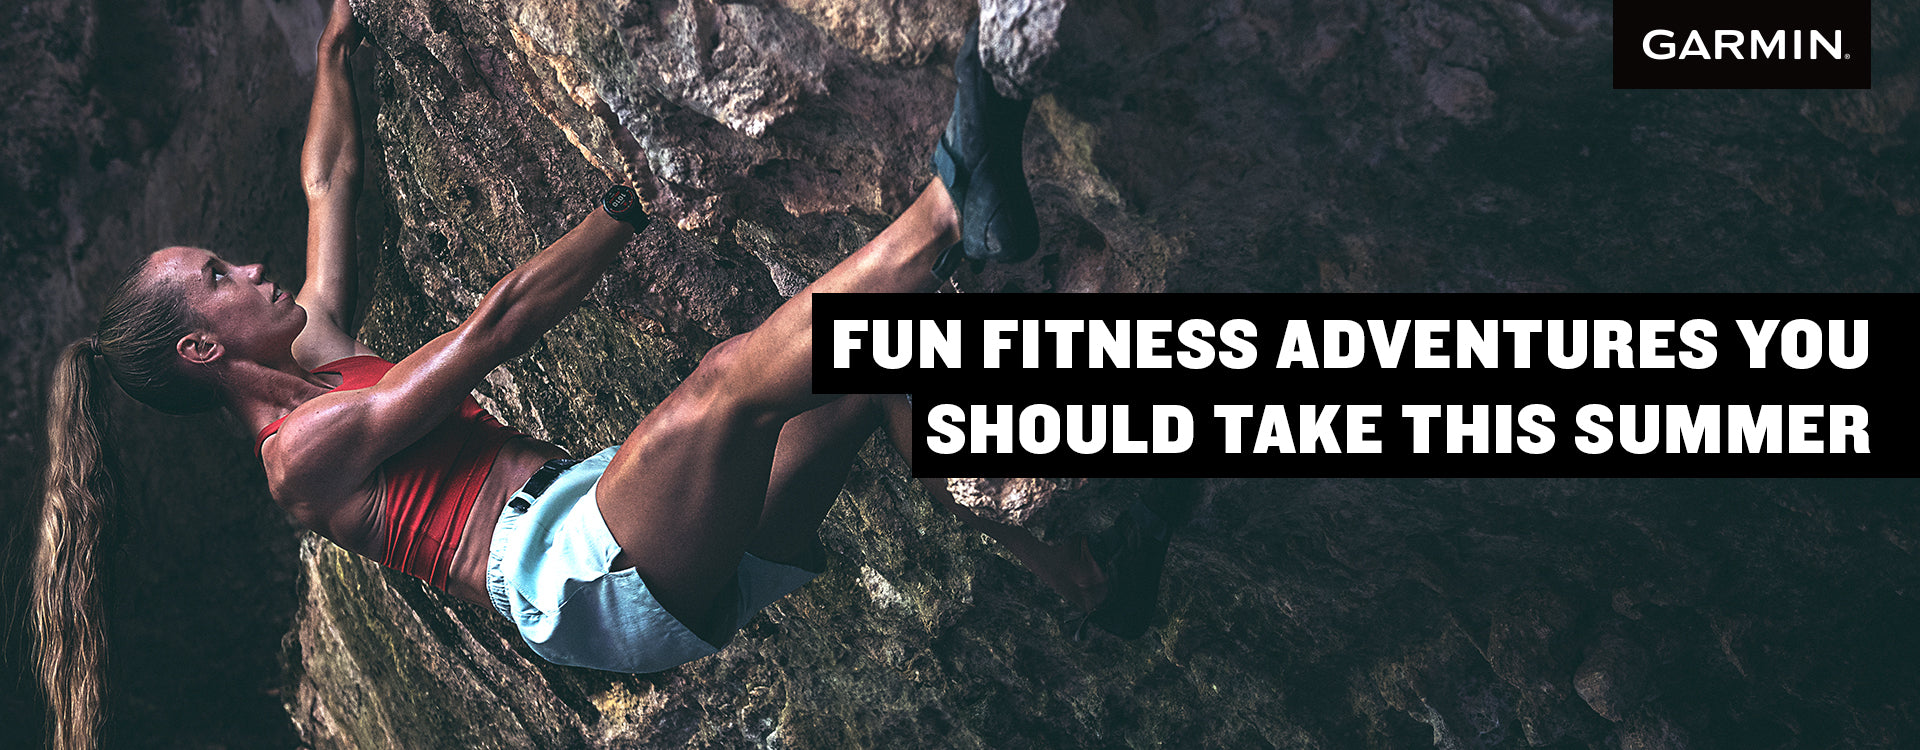 Fun Fitness Adventures You Should Take This Summer